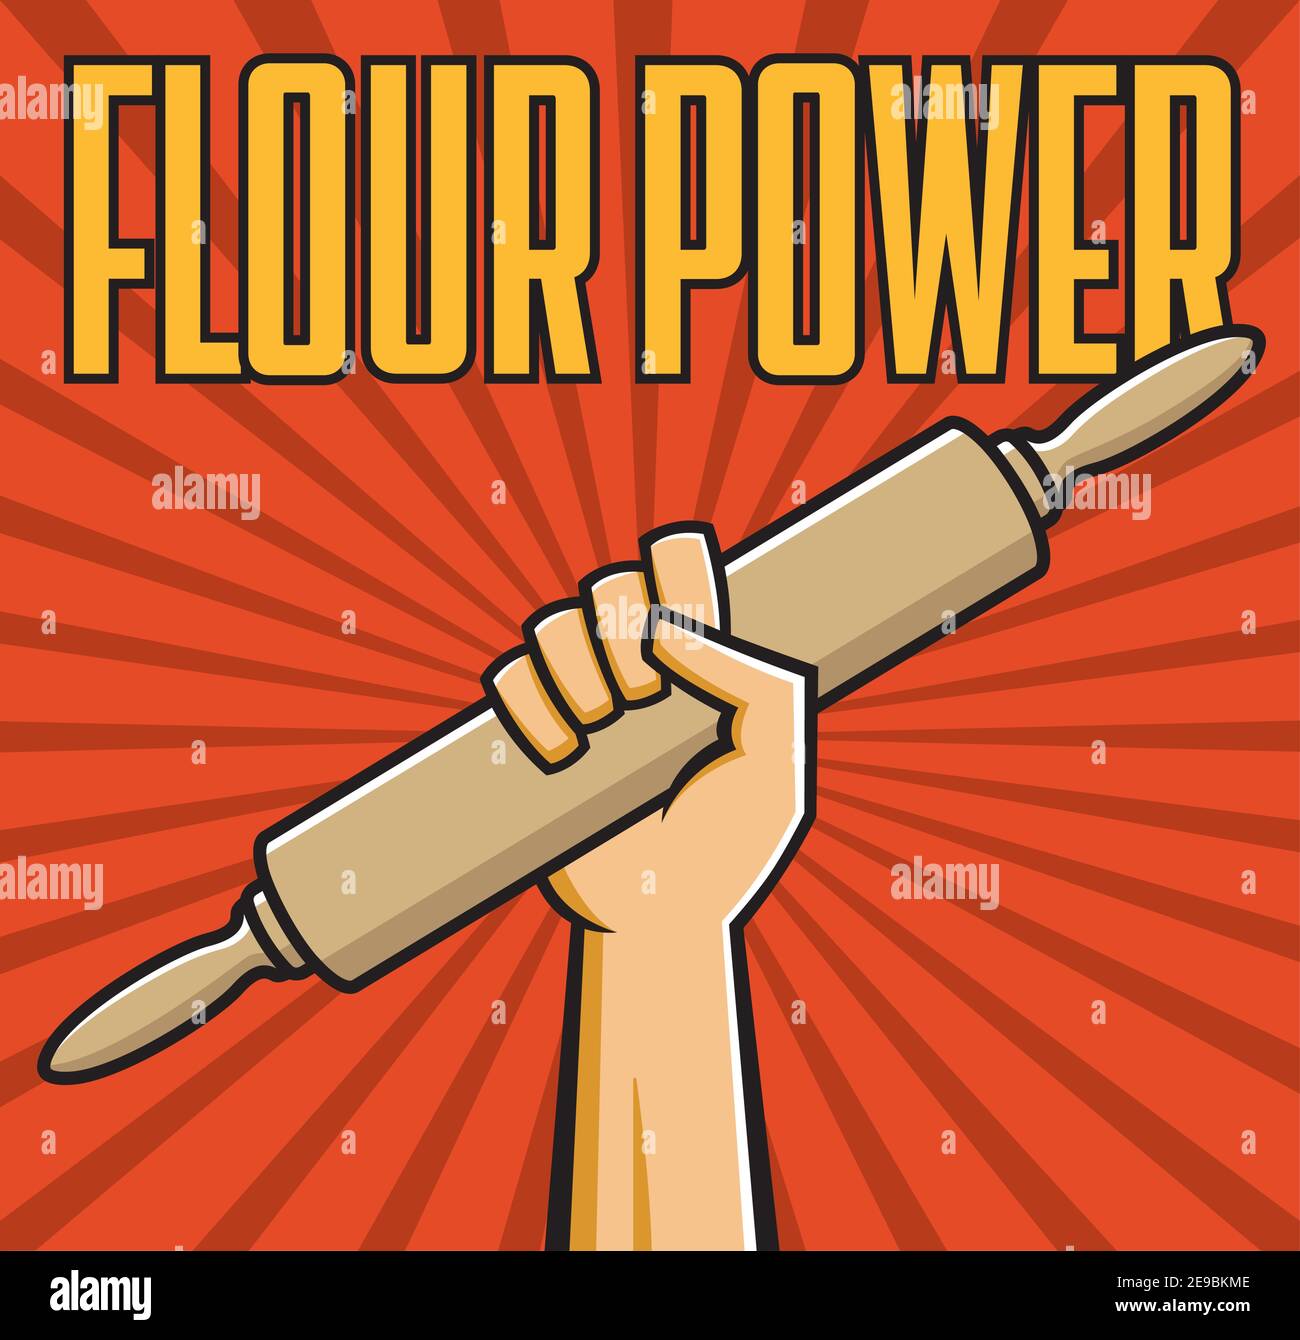 Flour power vector badge or emblem of fist holding rolling pin in the style of Russian constructivist propaganda posters. Stock Vector